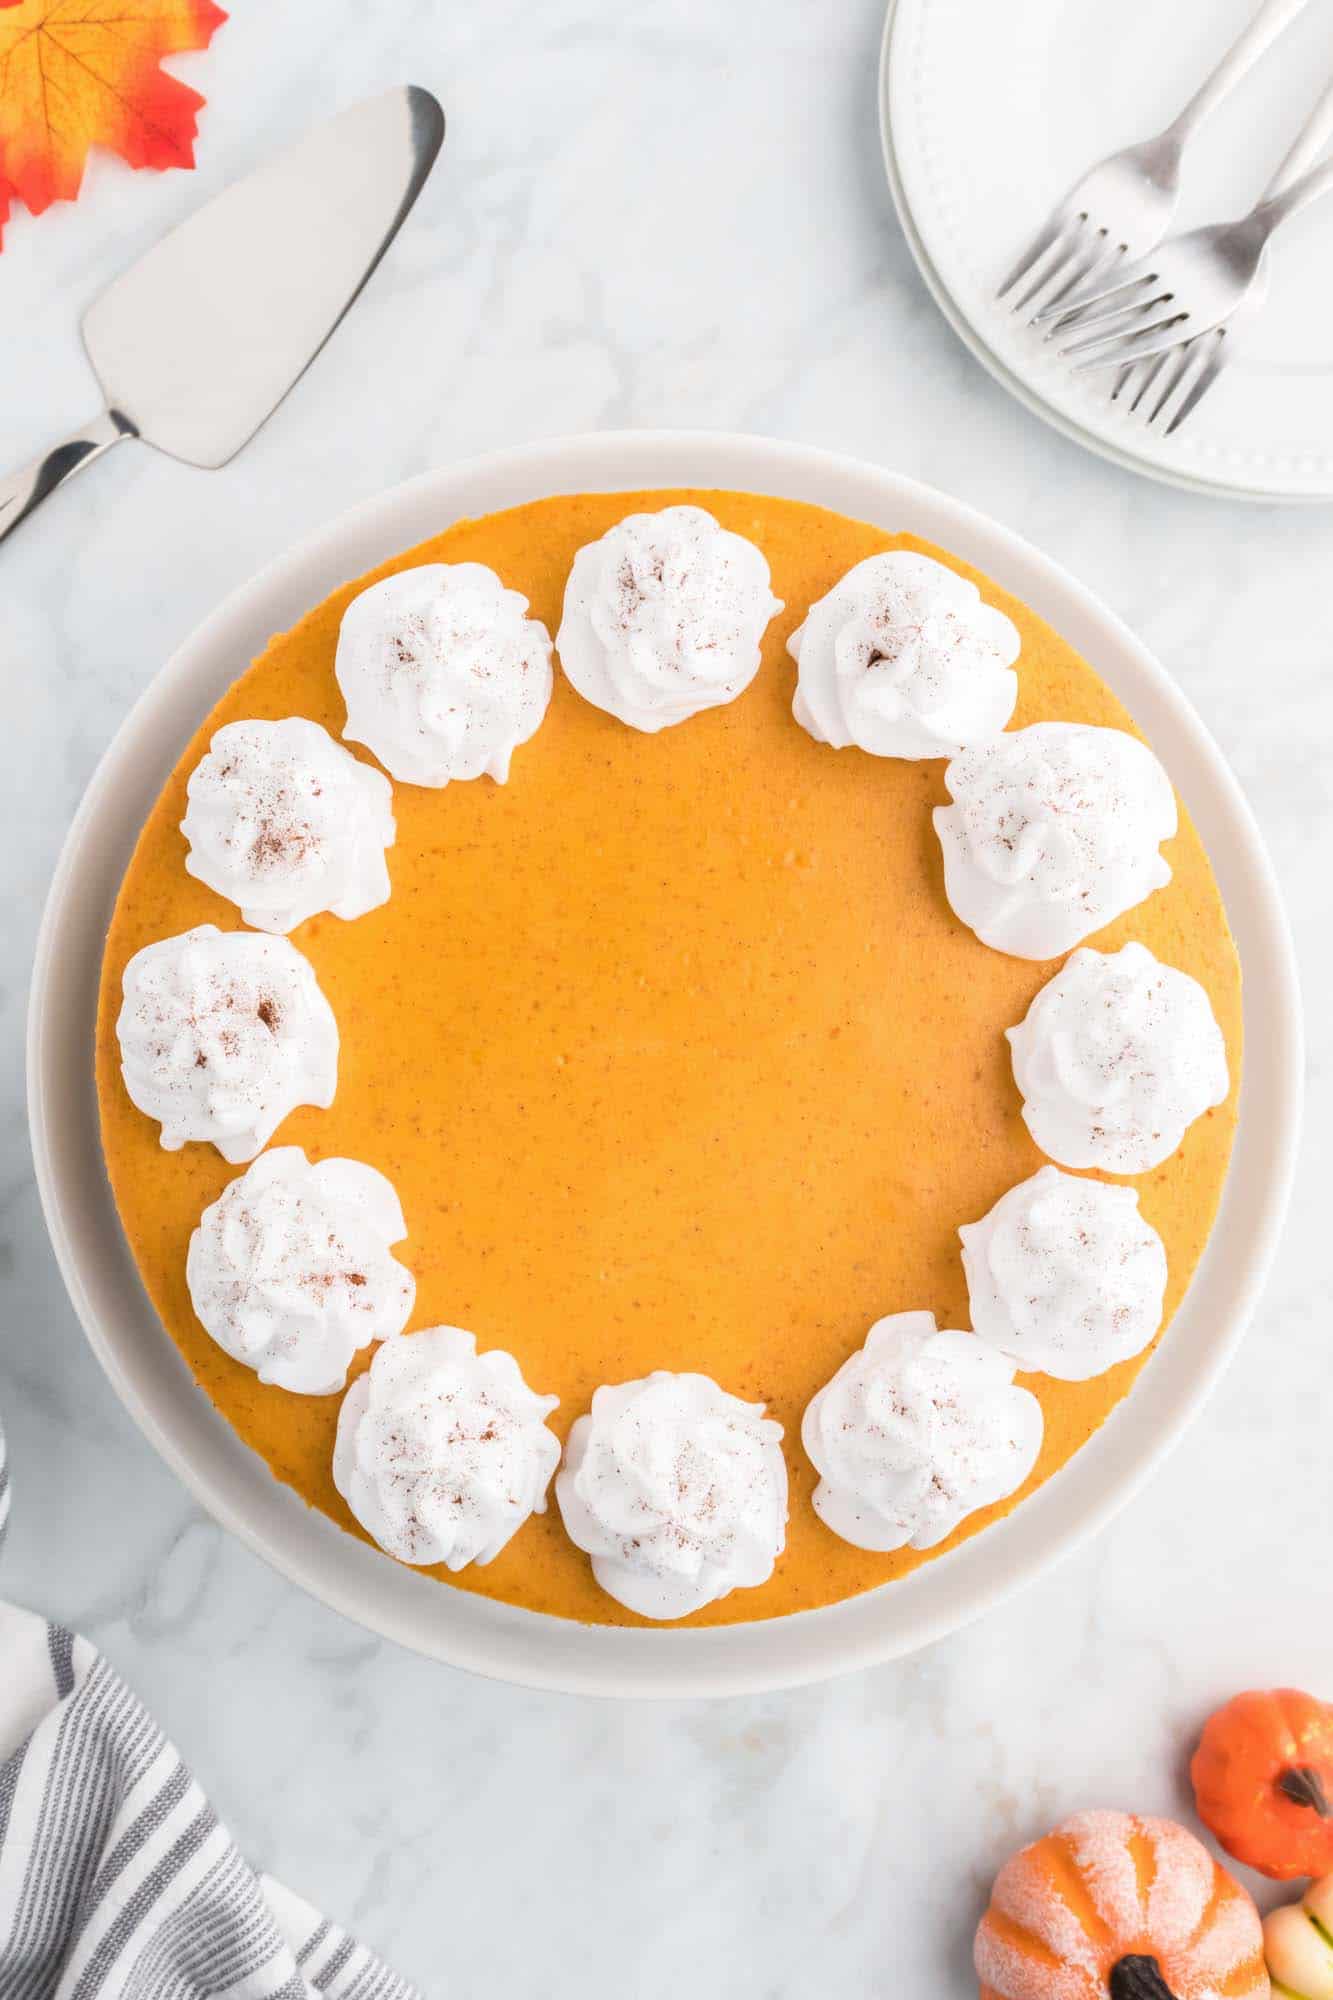 Overhead shot of pumpkin cheesecake decorated with whipped cream